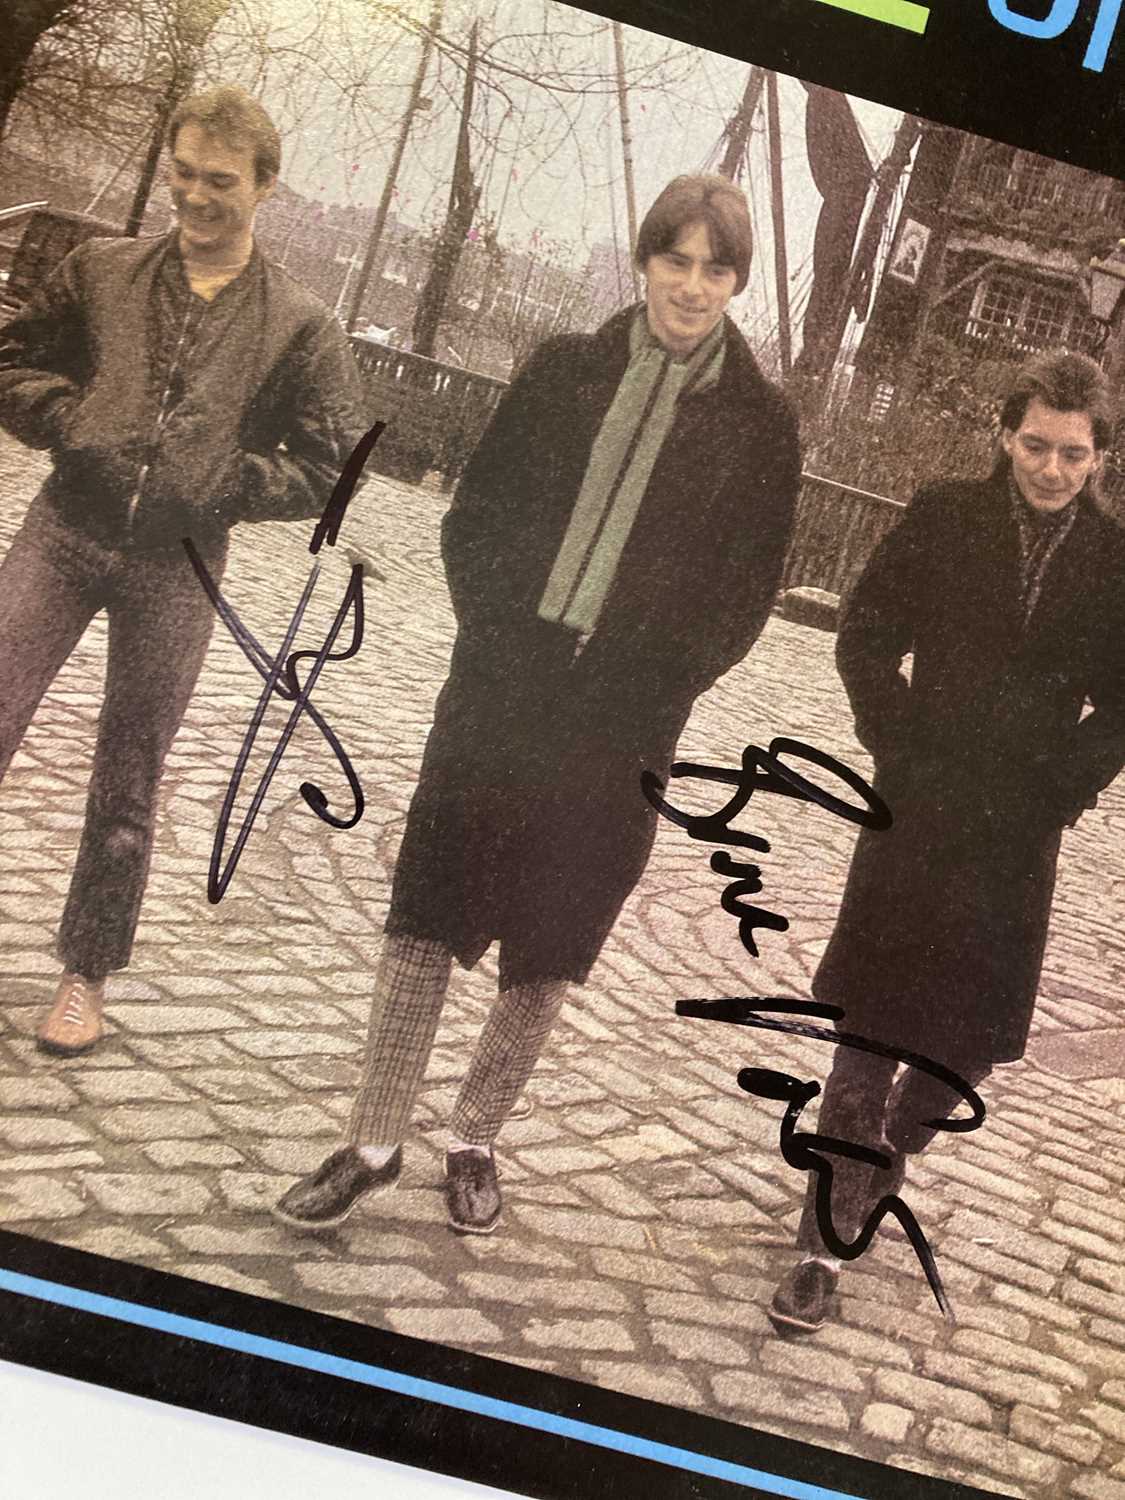 THE JAM - SIGNED ITEMS. - Image 3 of 3